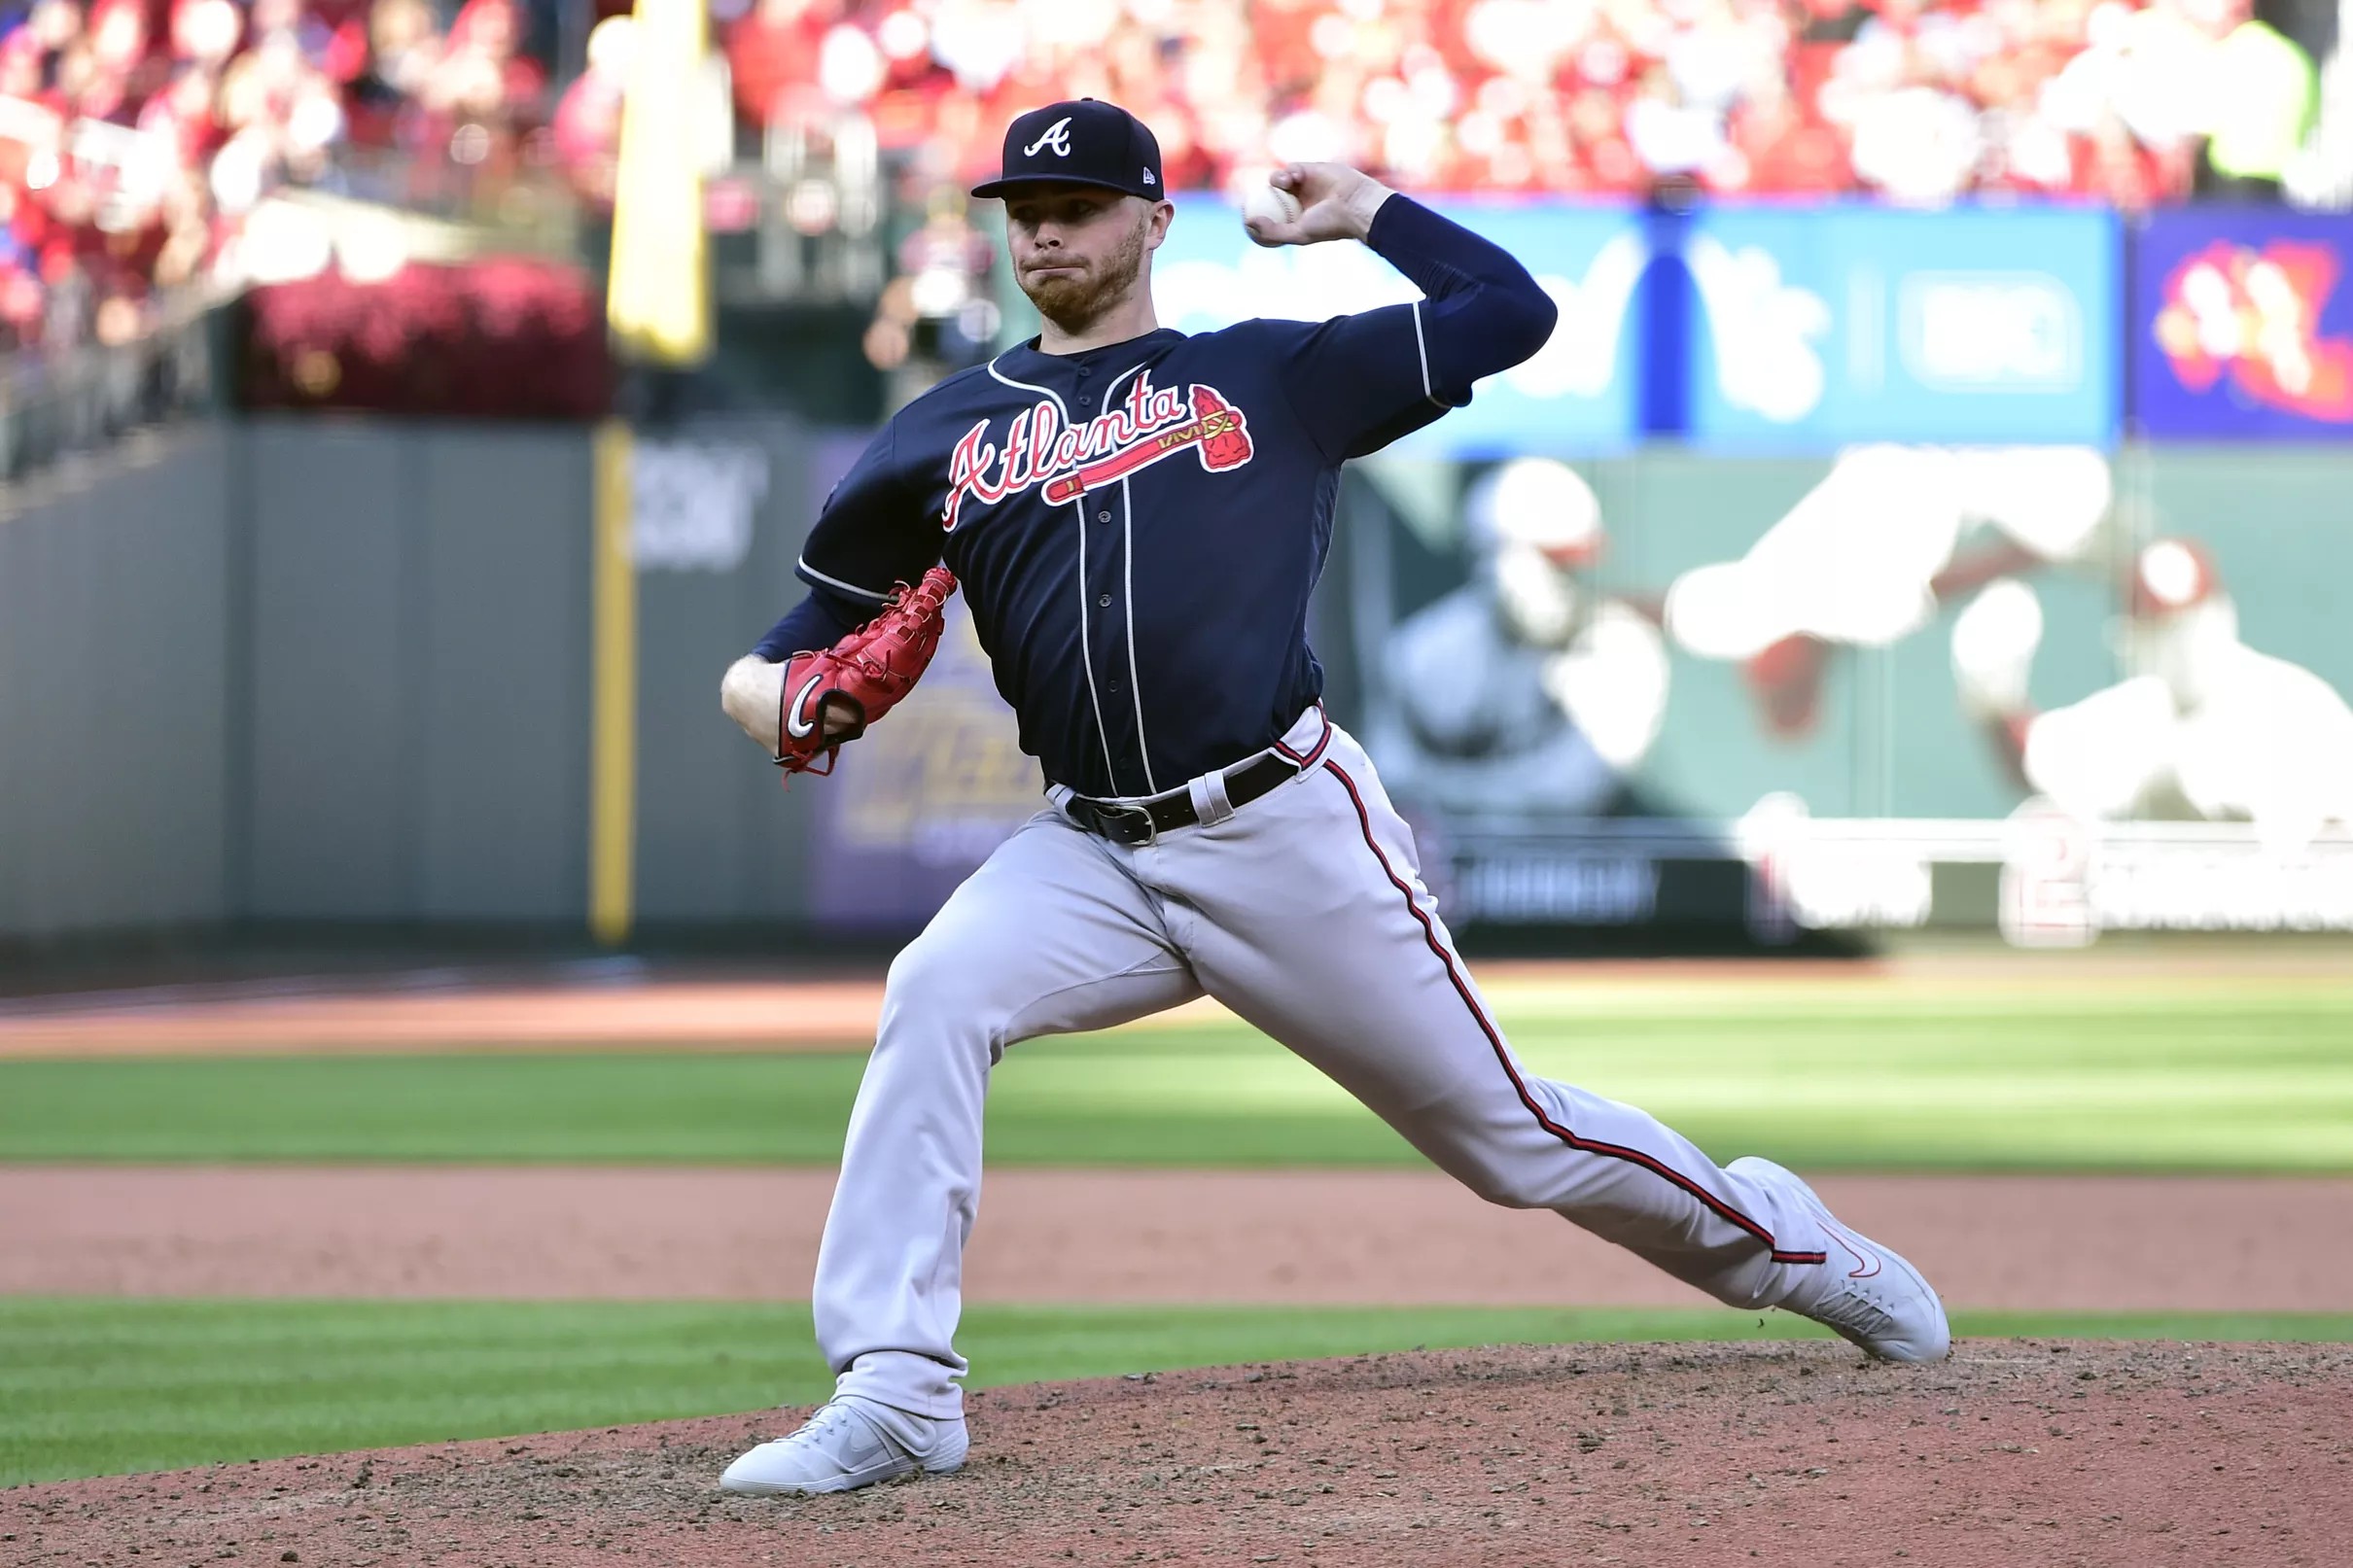 Newcomb will get a chance in spring training to compete for a spot in ...